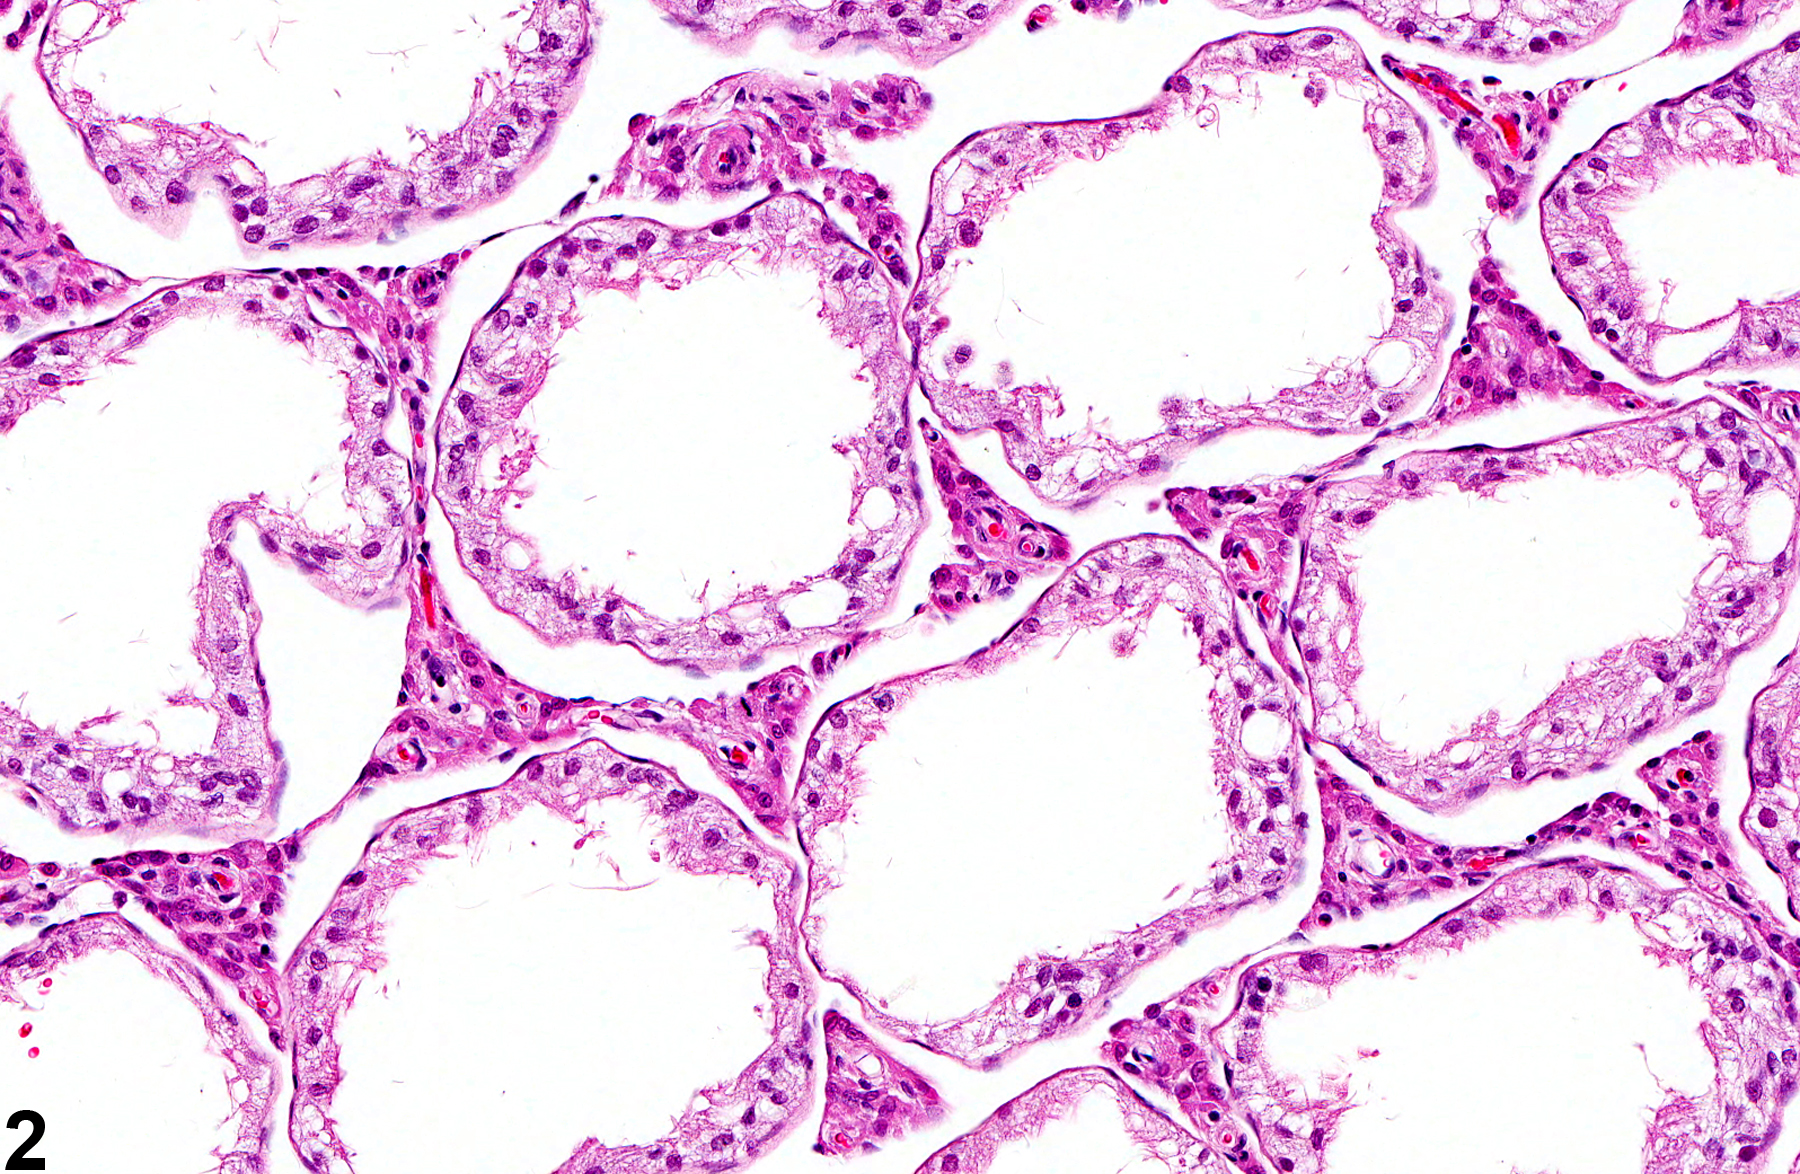 Image of germinal epithelium atrophy in the testis from a male F344/N rat in a subchronic study